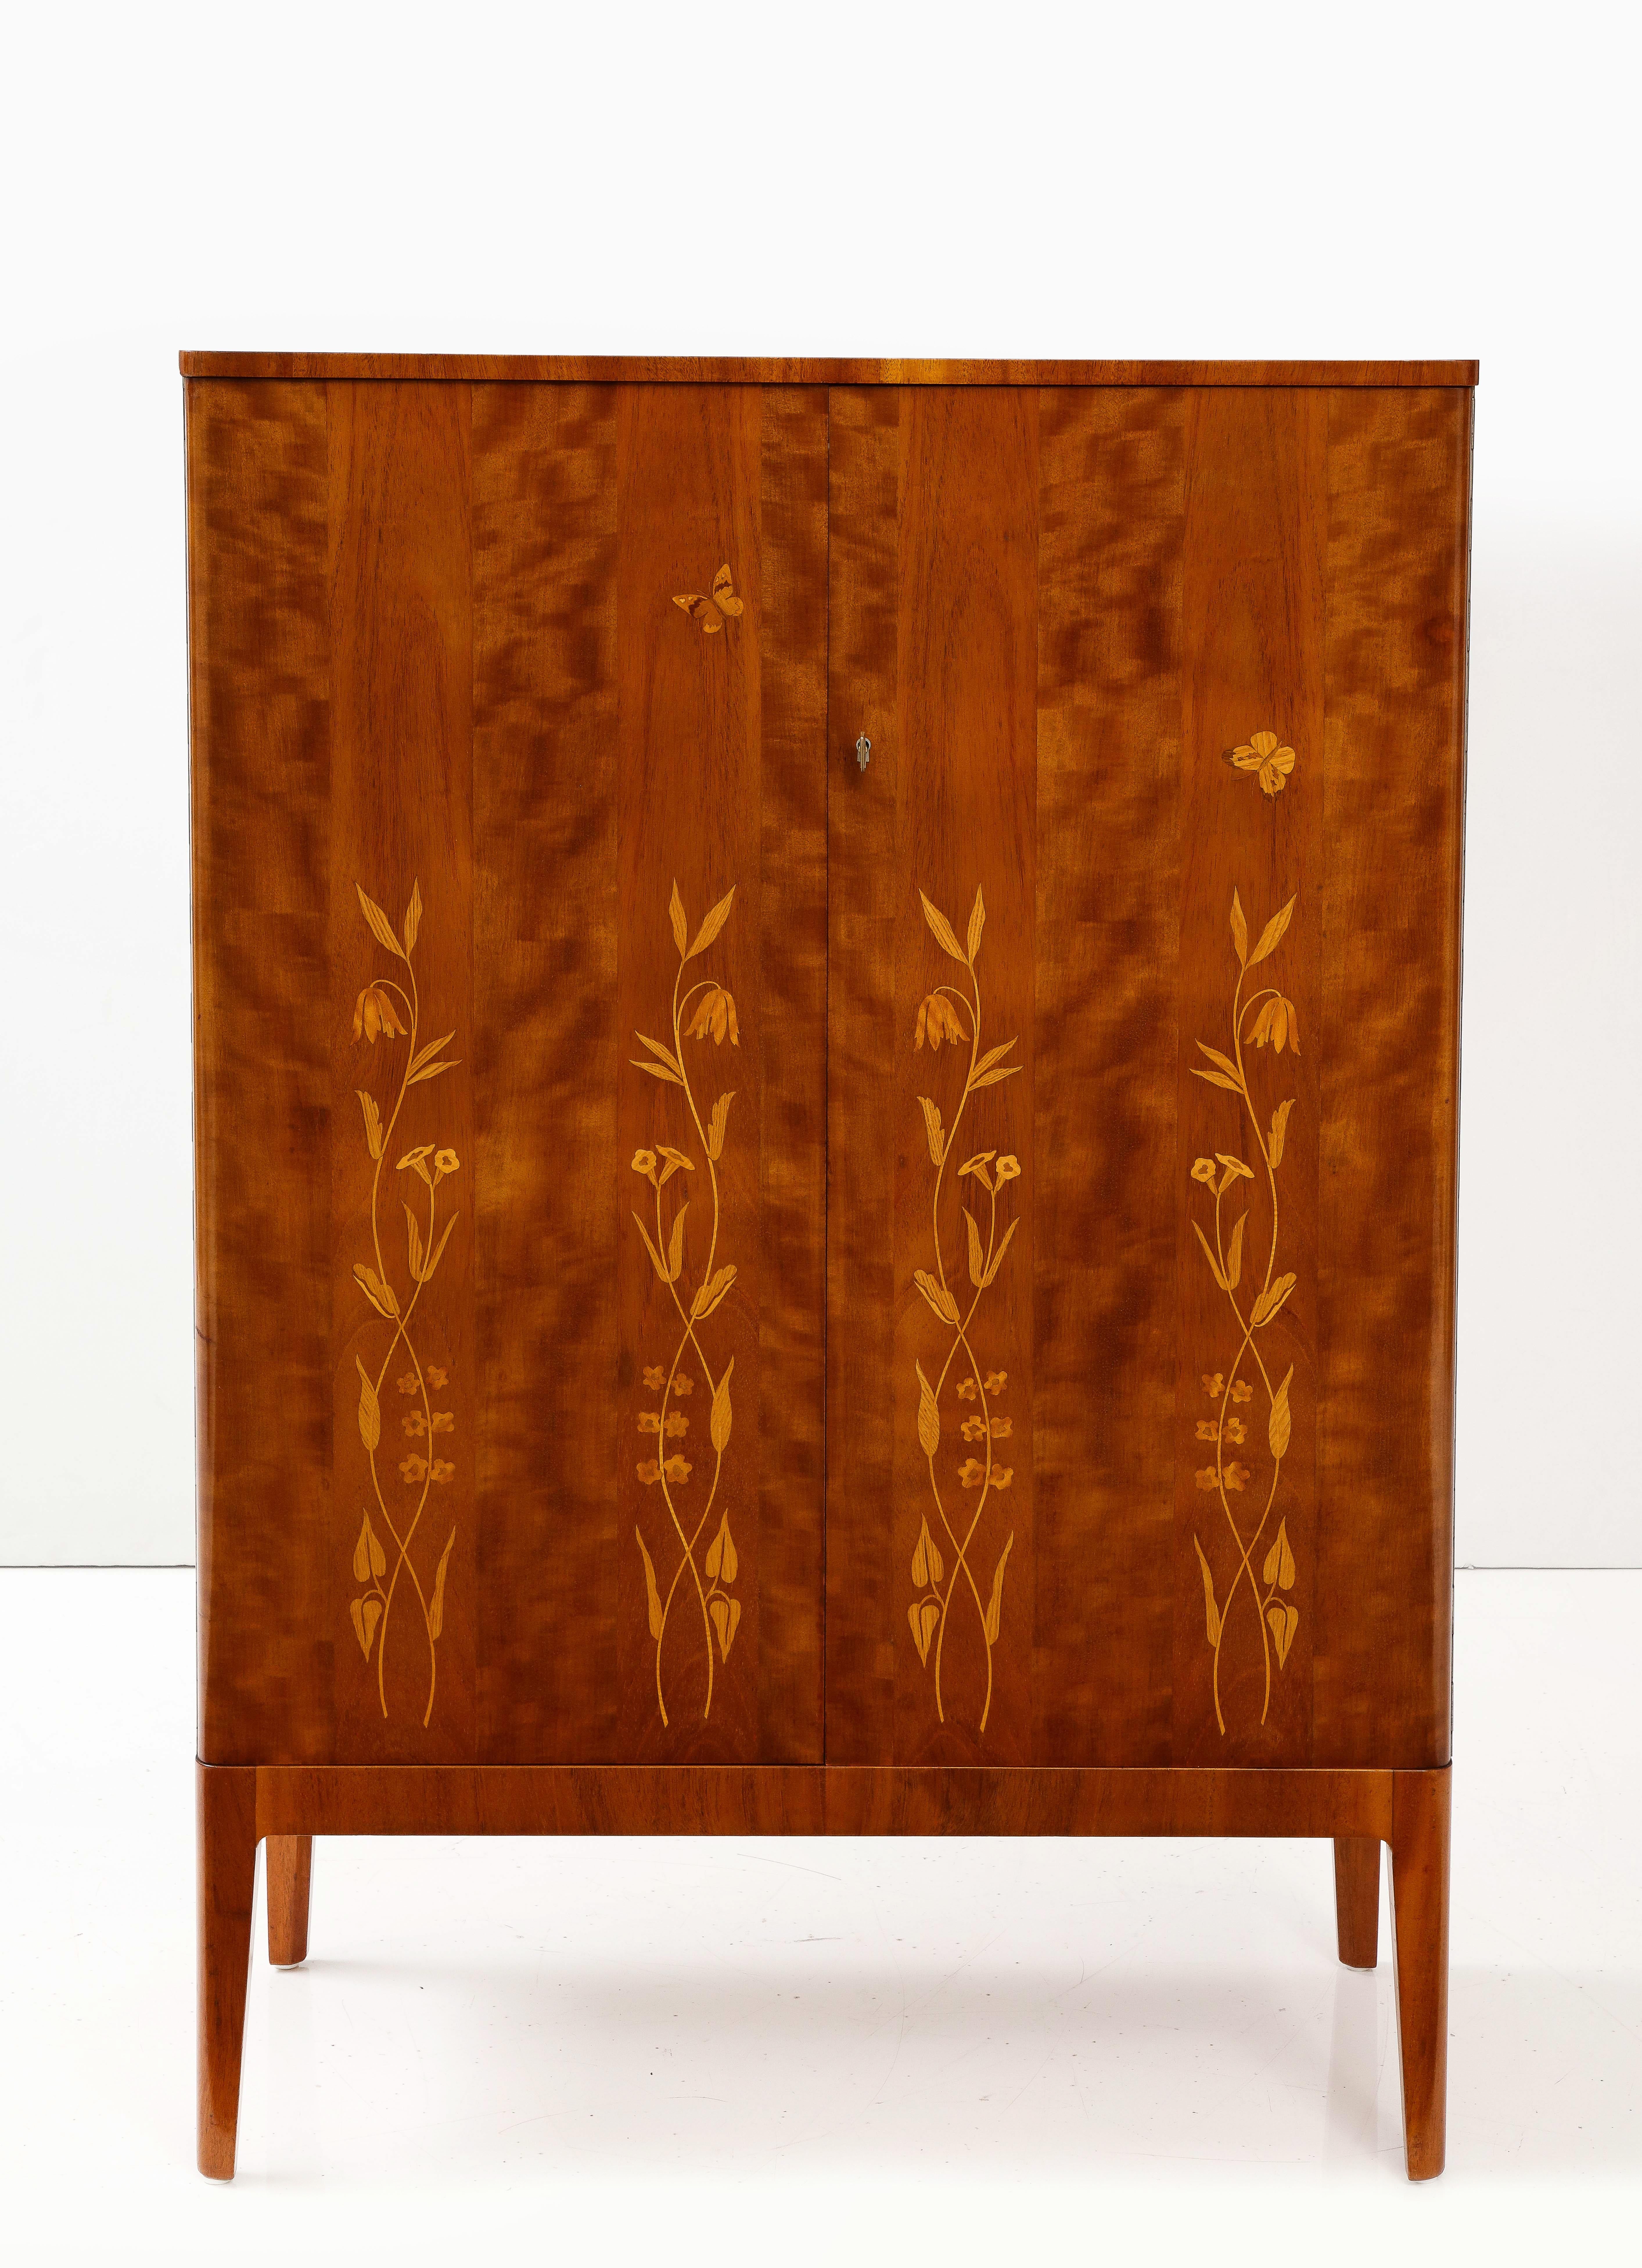 A Swedish Grace mahogany cabinet, Circa 1940s, the rectangular top with slightly rounded forcorners, above two cupboard doors with fruitwood leaf, flower and butterfly inlays, raised on tapered legs. The interior with four drawers above two shelves.